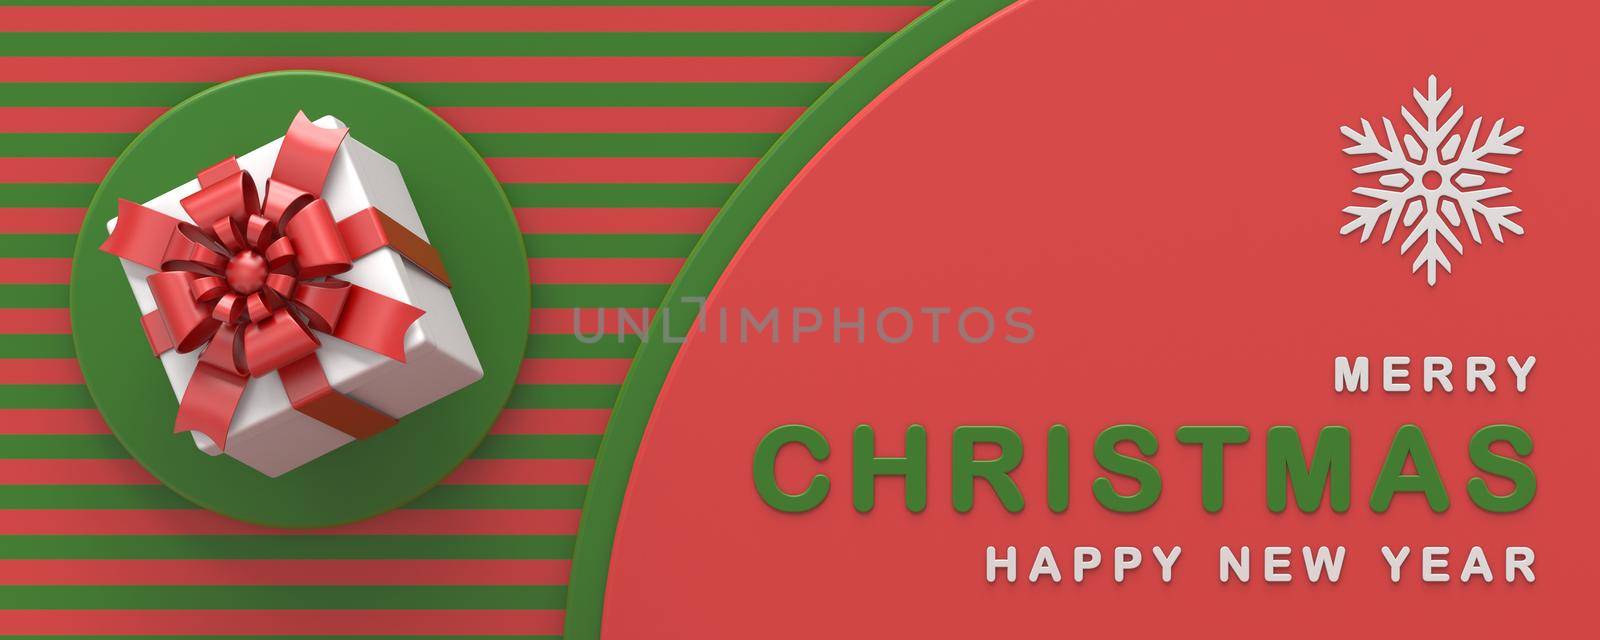 Gift box Merry Christmas and Happy New Year greeting 3D rendering illustration isolated on red background